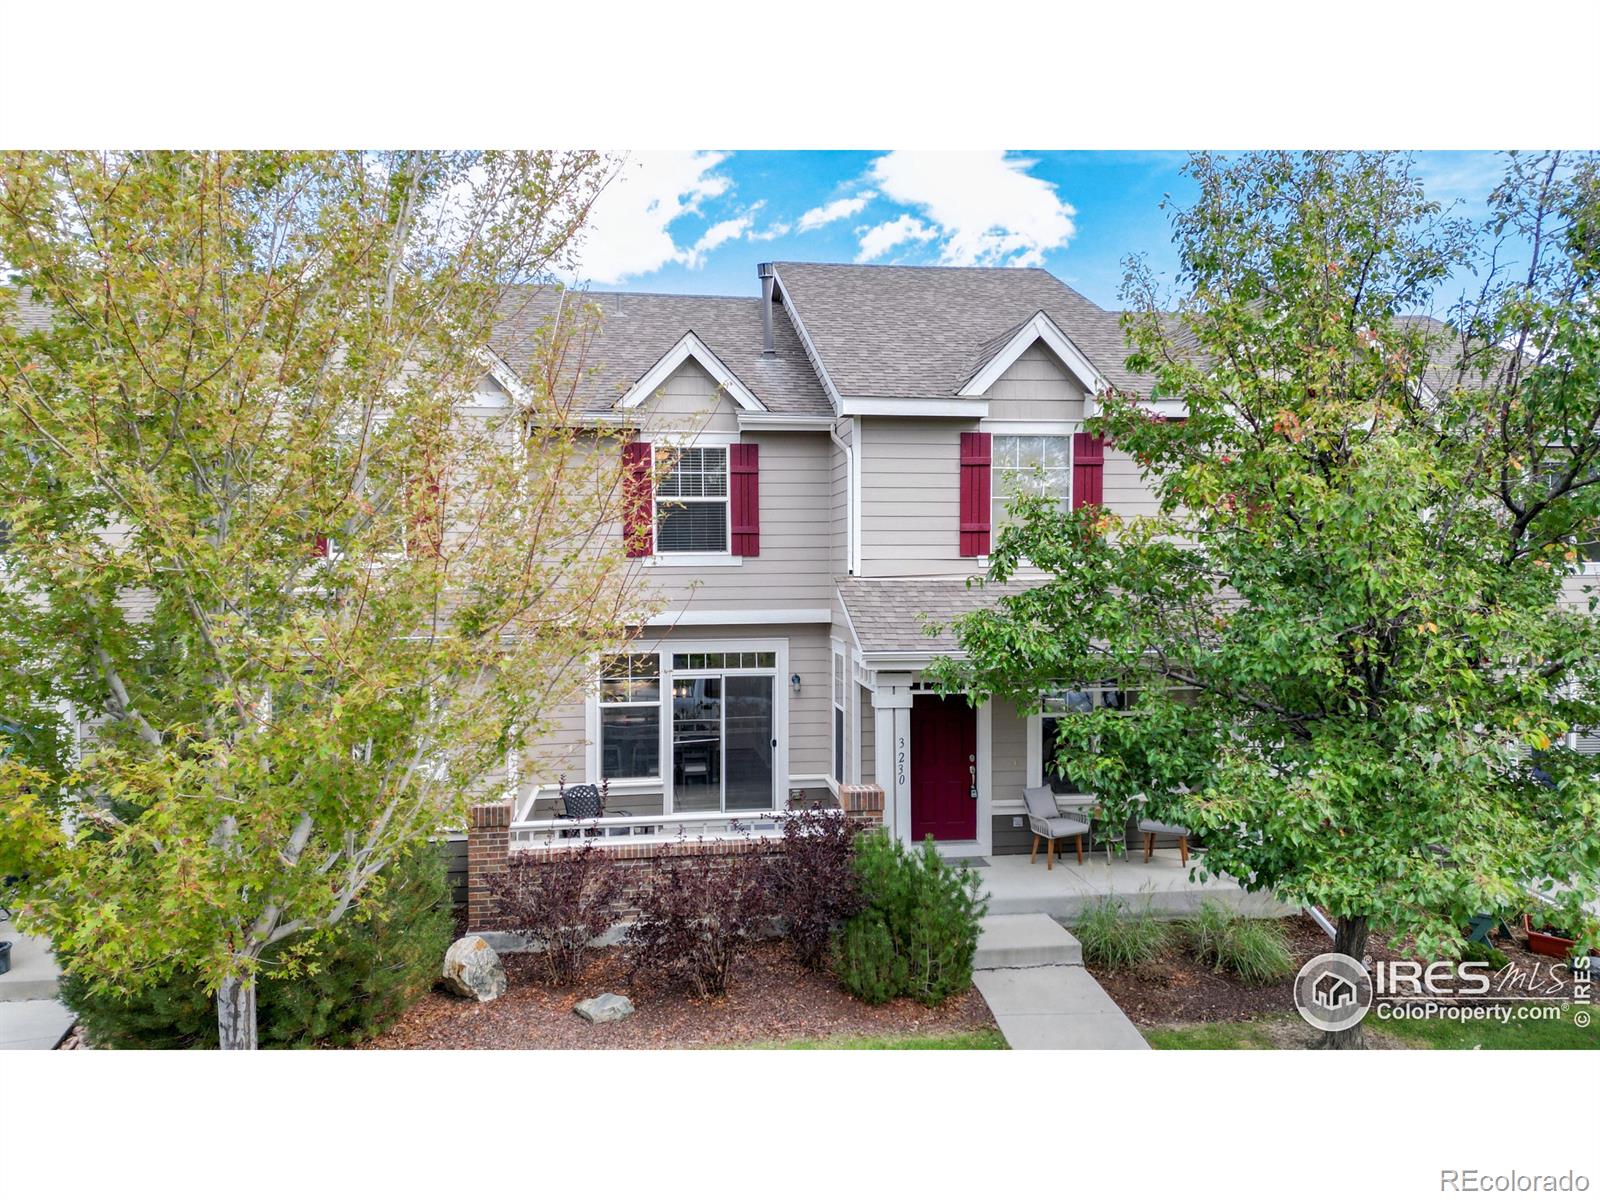 3230  springfield drive, Loveland sold home. Closed on 2024-02-23 for $430,000.